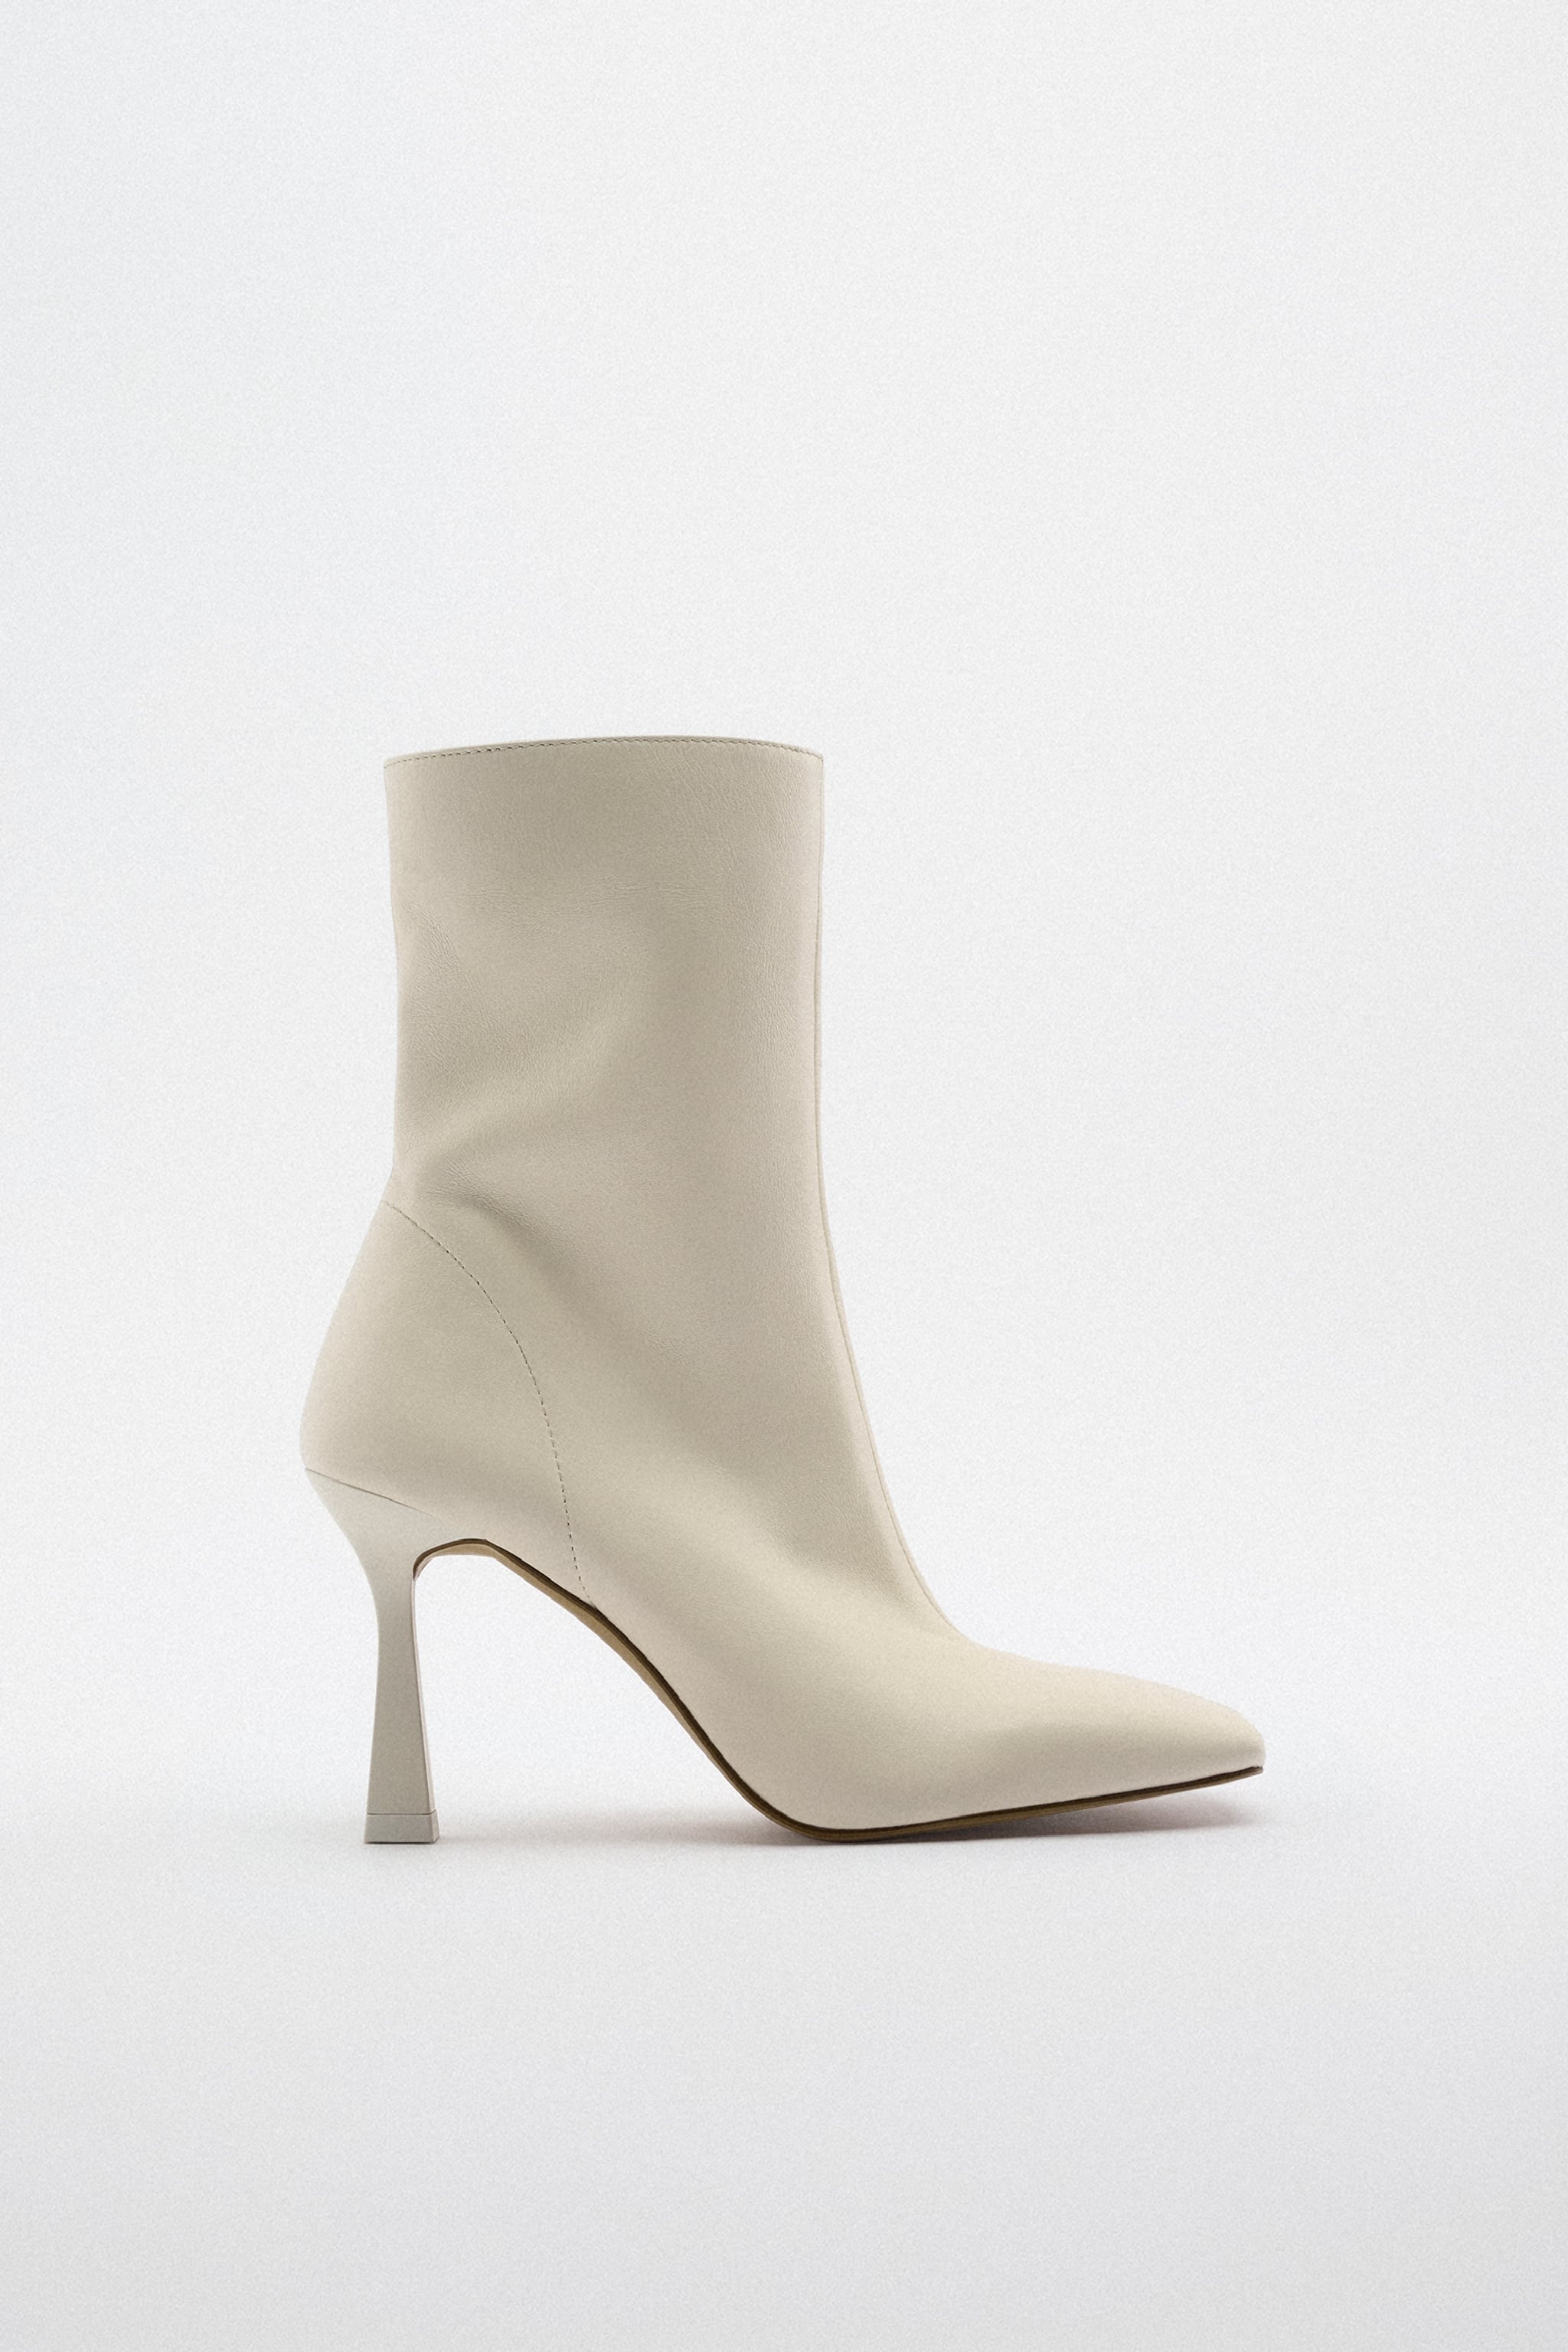 9 Stylish White-Boot Outfits to Wear Year-Round | Who What Wear